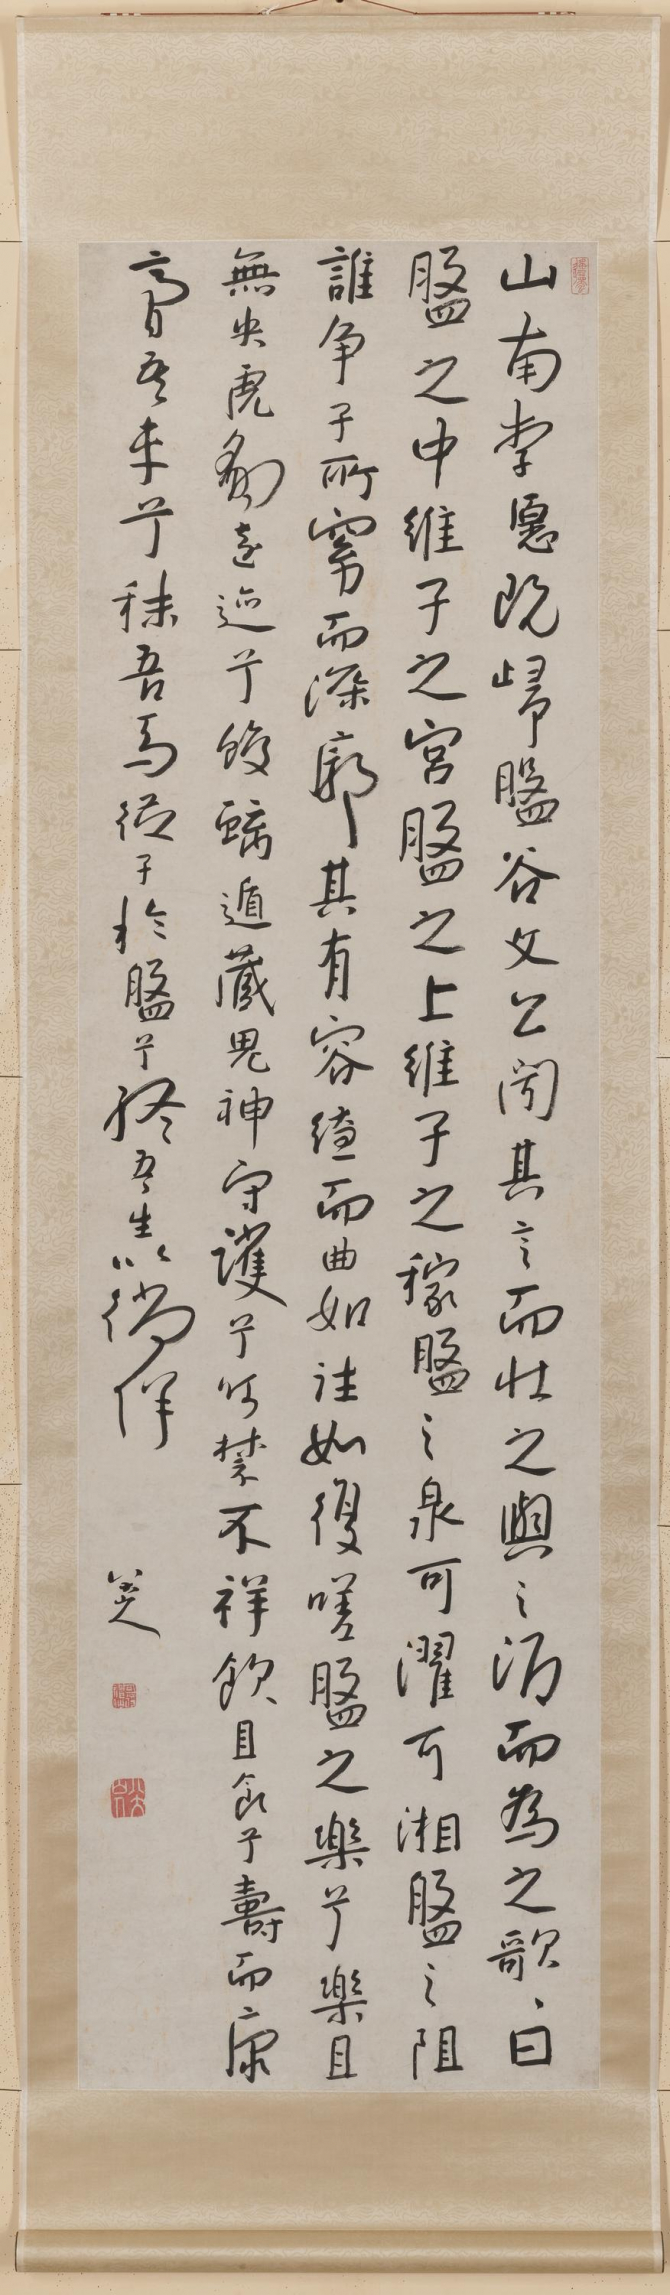 Image of "Words of Farewell for Li Yuan Returning to Pangu in Running Script"